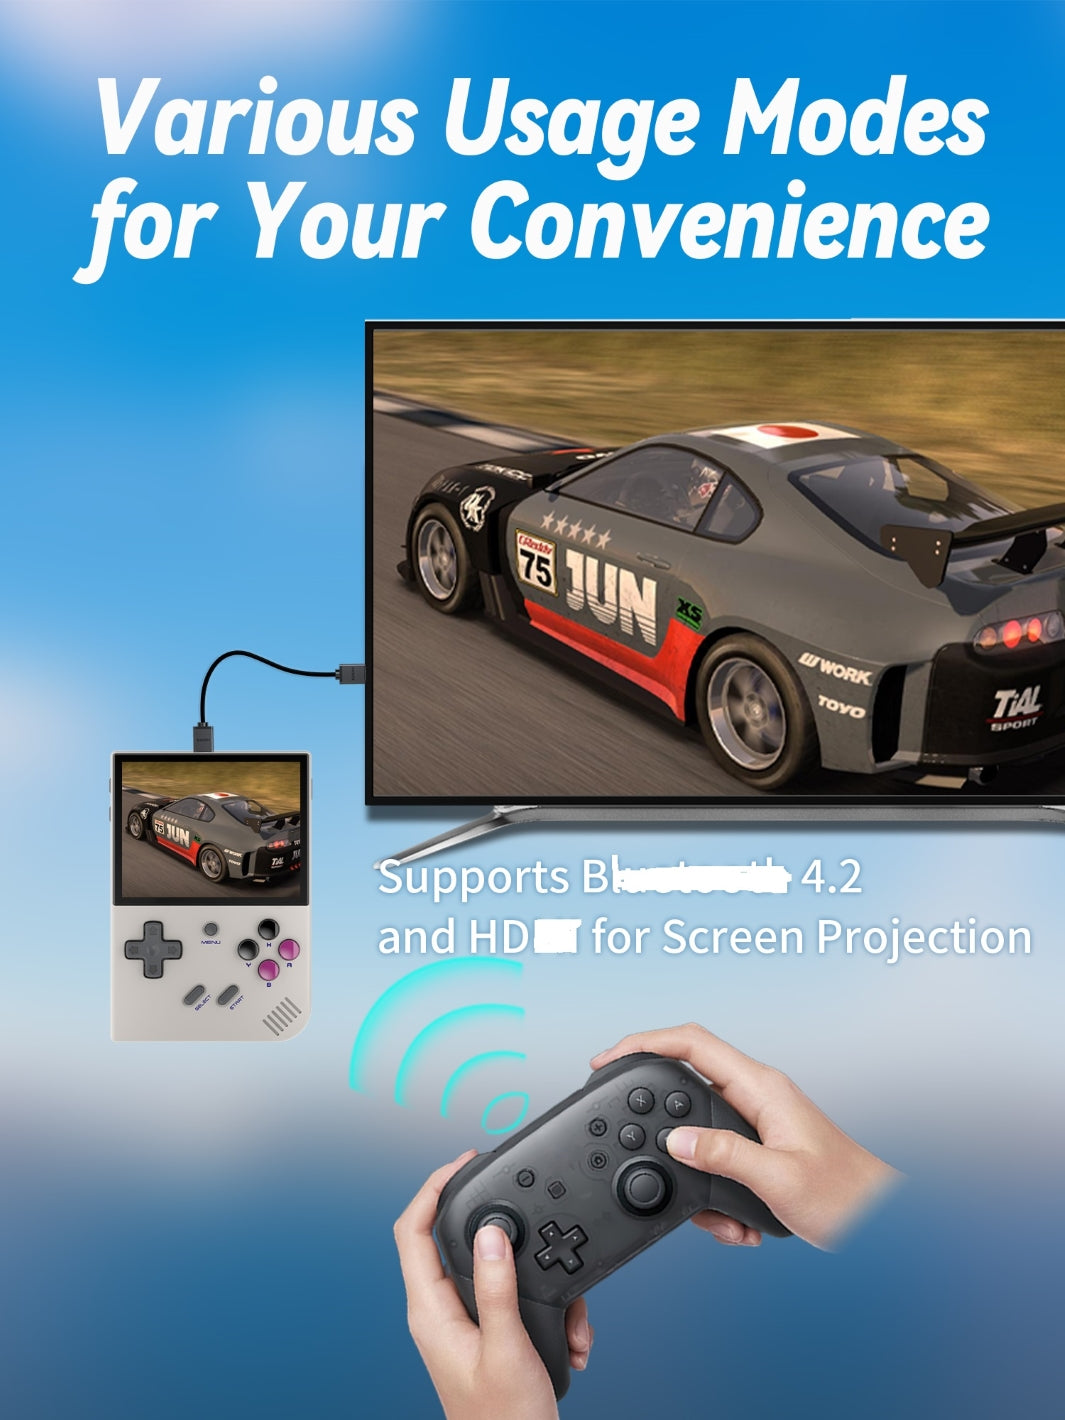 The Anbernic RG35XXPLUS has HDMI capabilities allowing users to connect to their TV and play all their games with a larger screen. Making it a family fun experience.